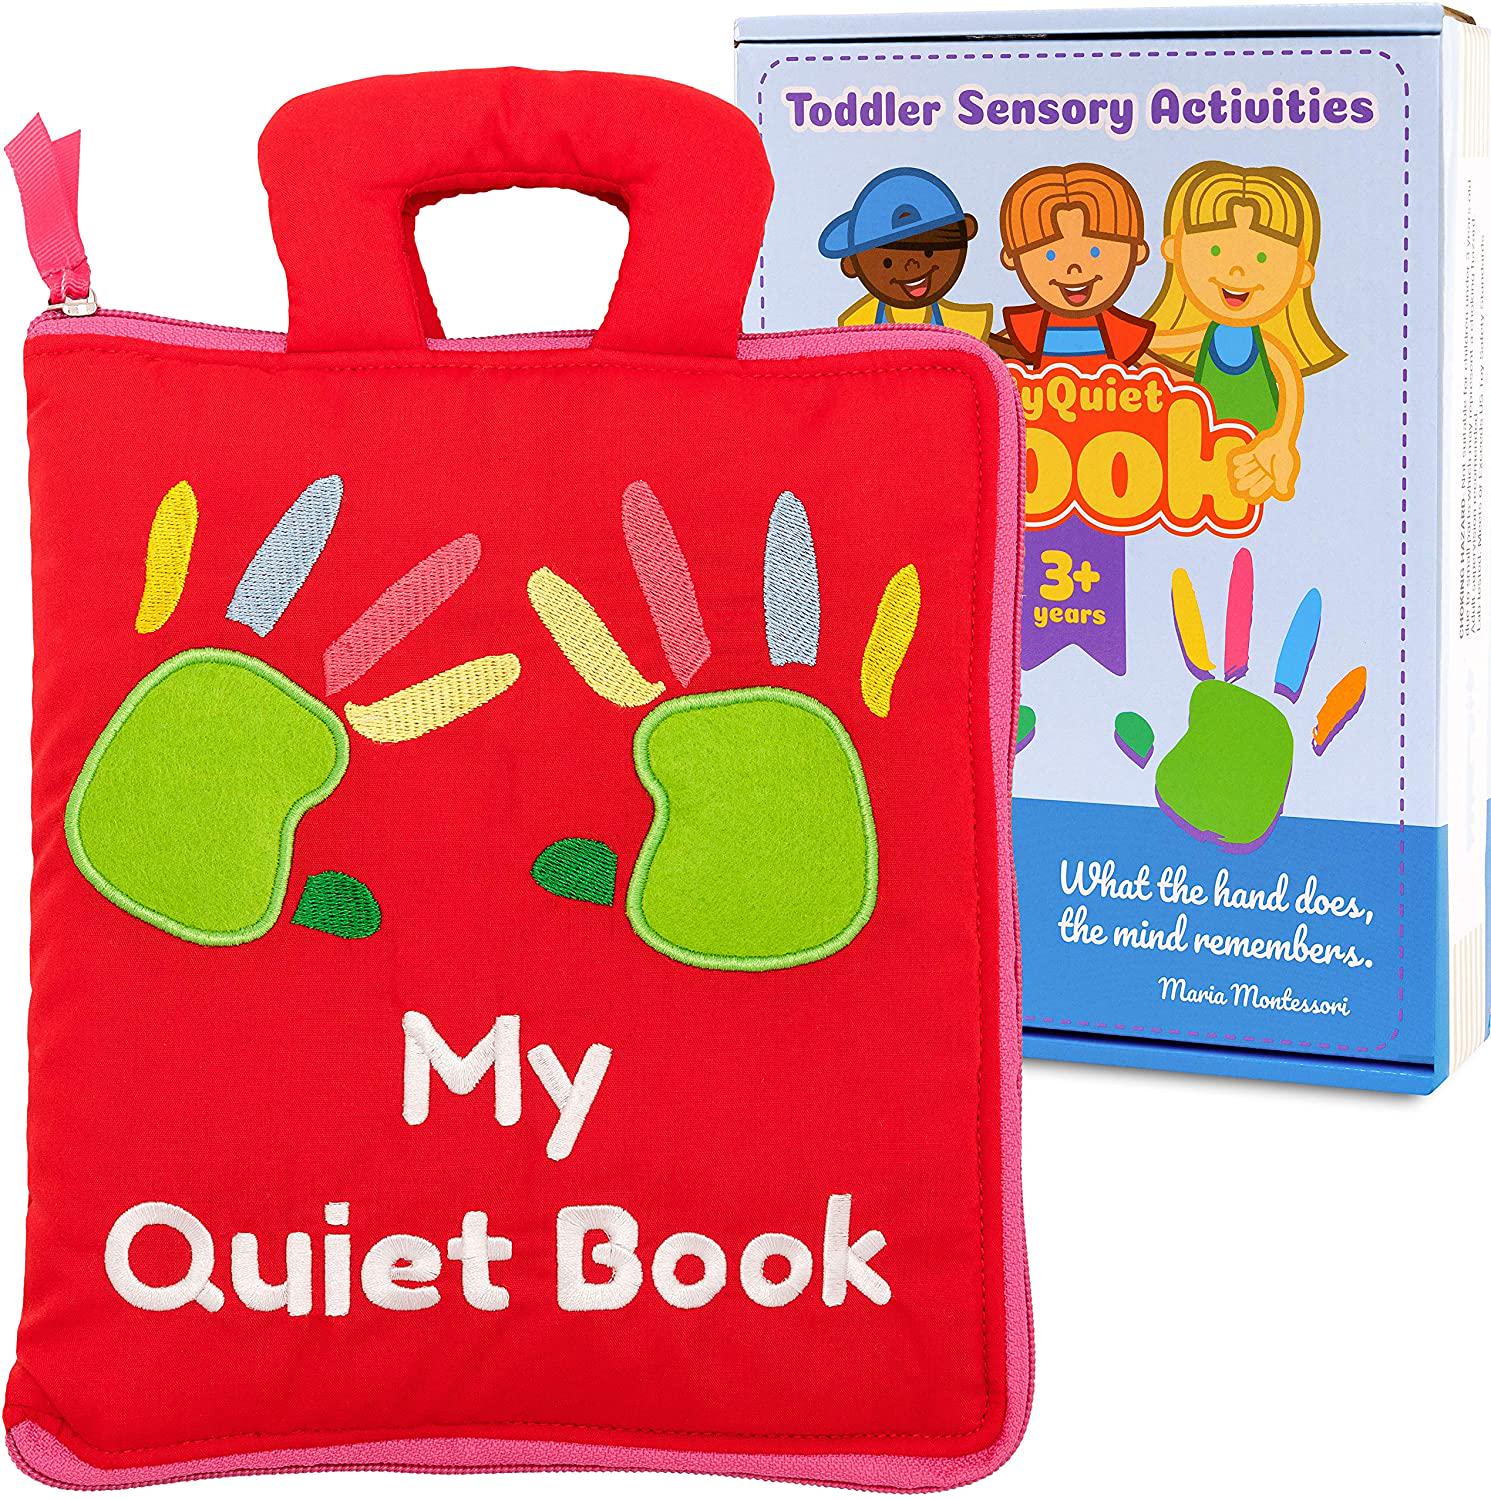 marsebia, marsebia Quiet Book with 9 Educational Toddlers Activities - Learning Cloth Book with Preschool Activities for Early Learning, My Quiet Book - Montessori Toy for Travel